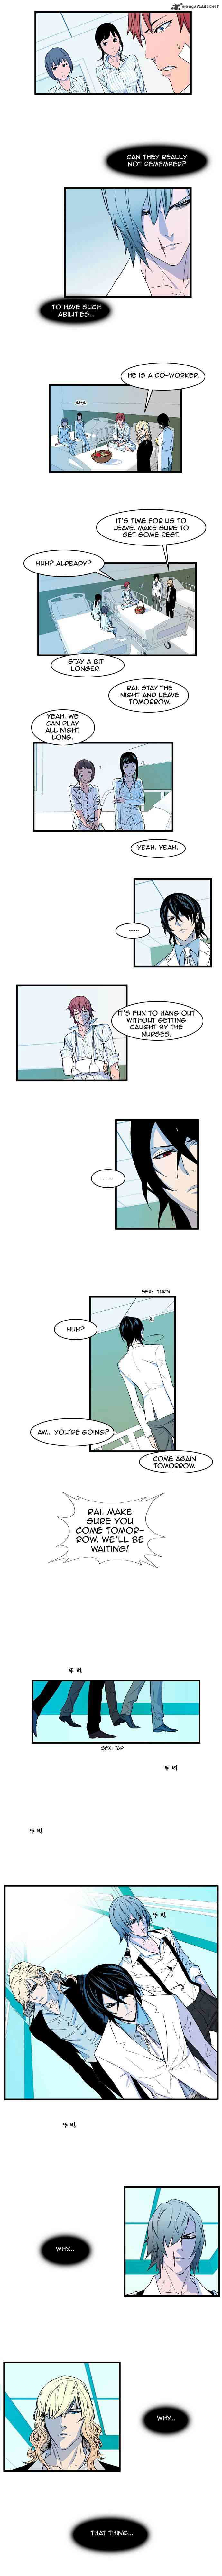 Noblesse Chapter 76 _ Chapters 76-90 page 39